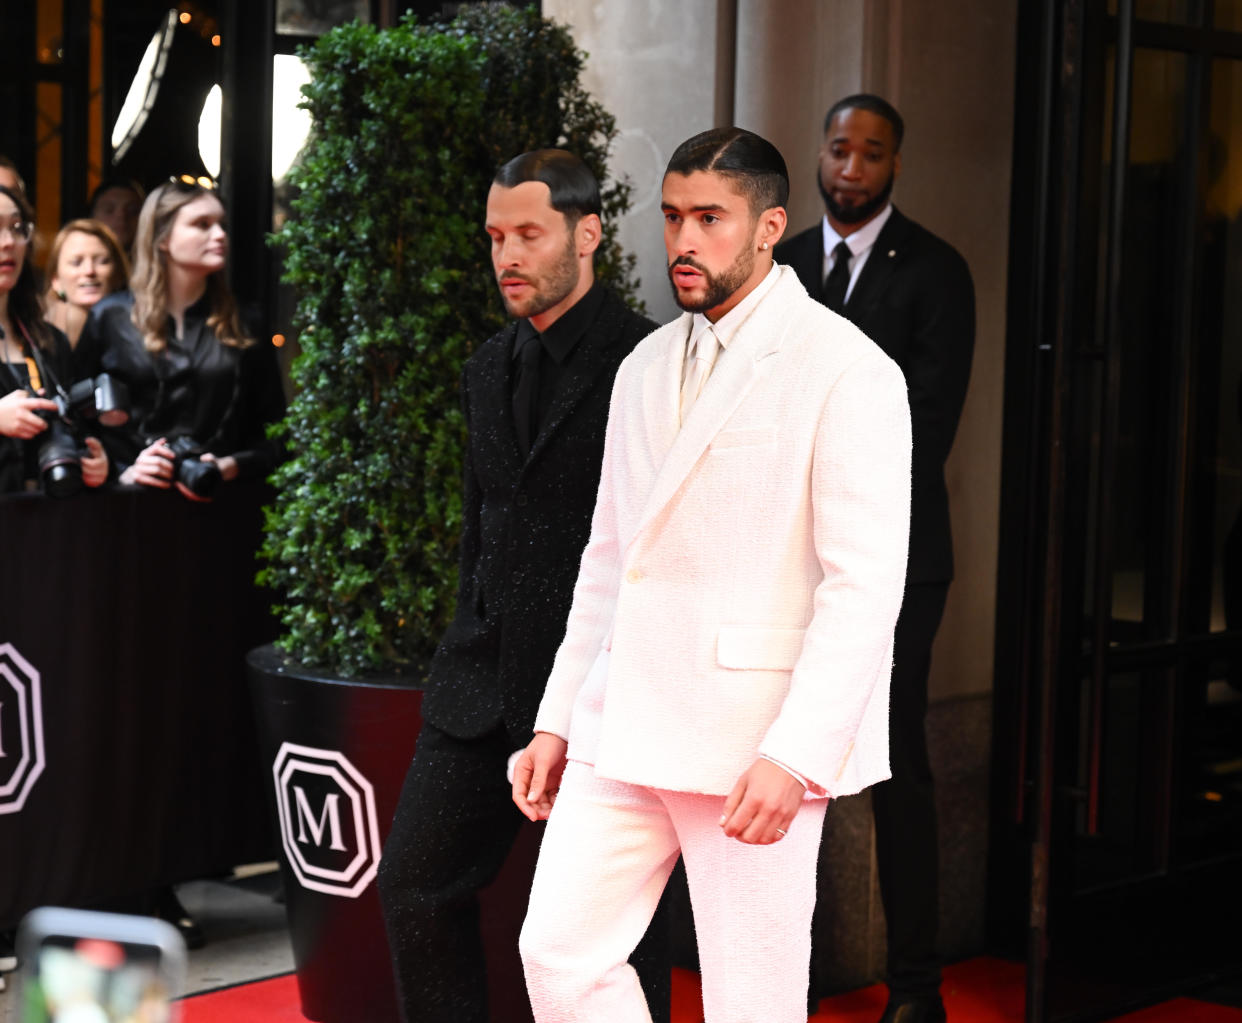 Simon Porte Jacquemus and Bad Bunny depart The Mark Hotel to attend the 2023 Met Gala in New York, New York, on May 1, 2023. / Credit: Lokman Vural Elibol/Anadolu Agency via Getty Images